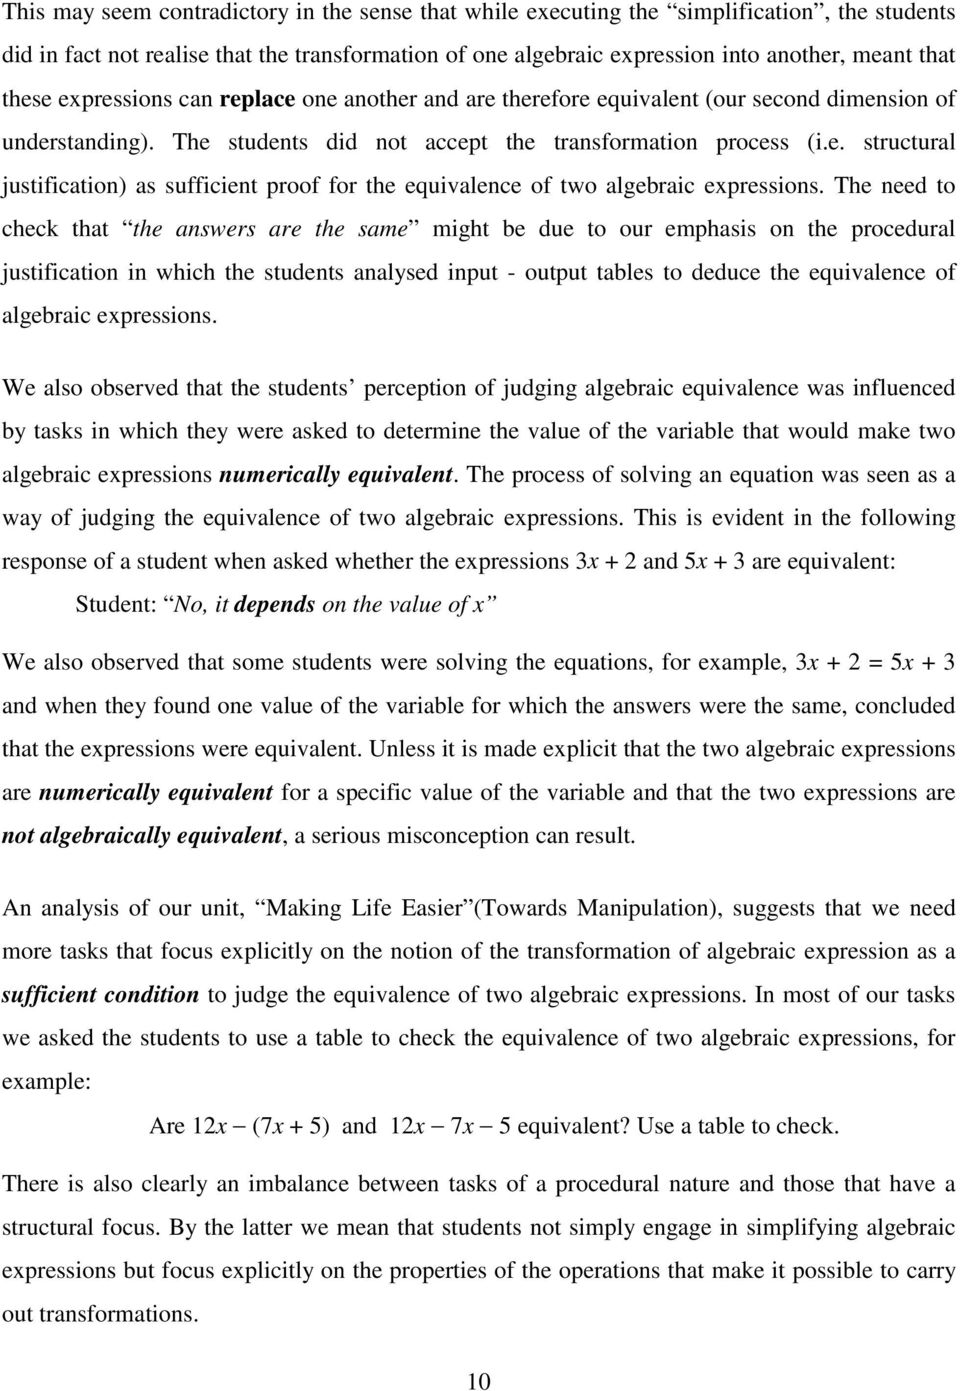 The need to check that the answers are the same might be due to our emphasis on the procedural justification in which the students analysed input - output tables to deduce the equivalence of